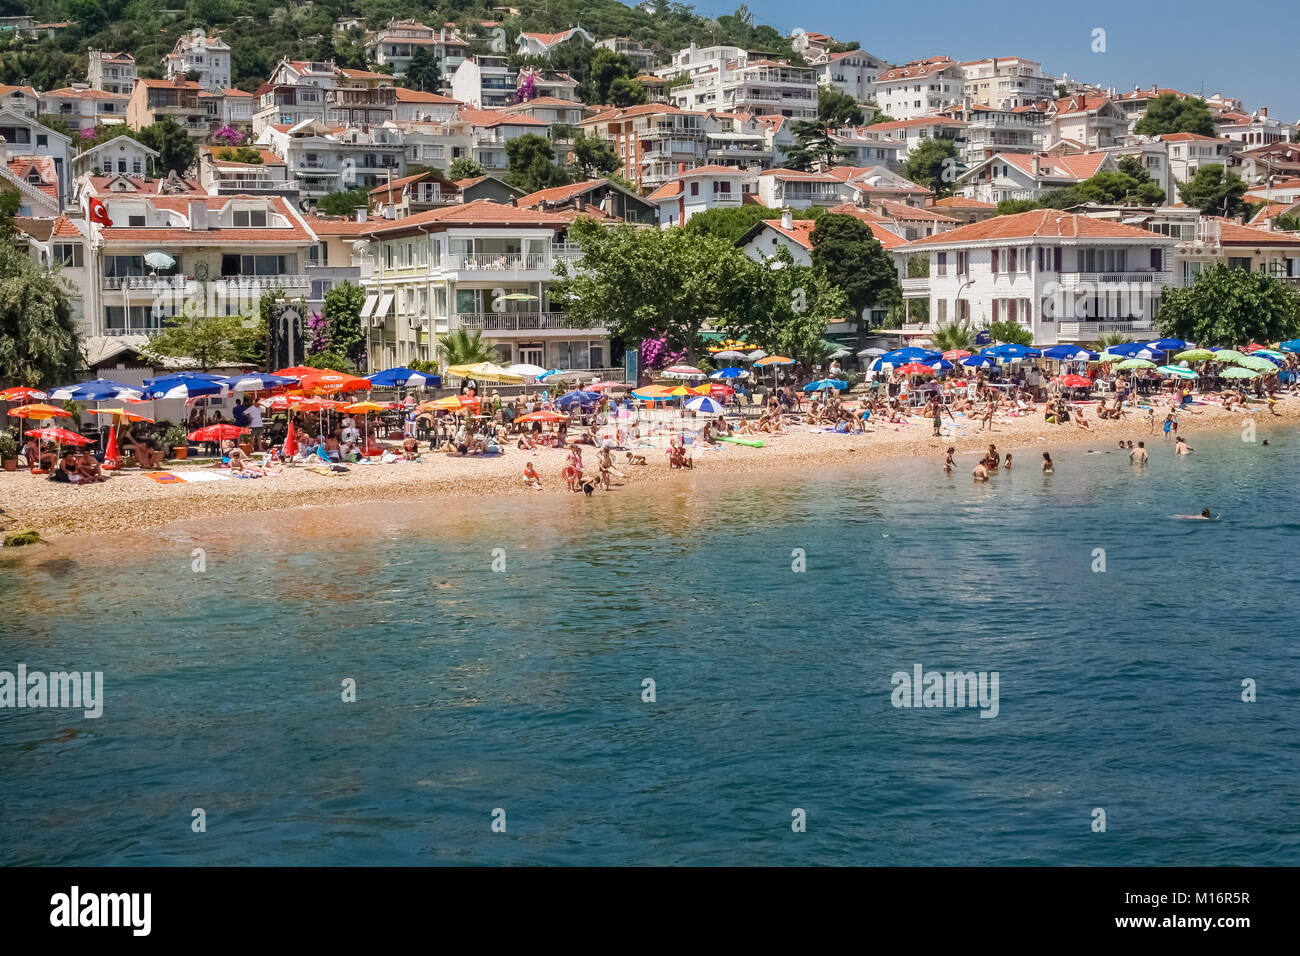 Kinaliada, Princes islands, Istanbul, July 13, 2010: View of the crowded beach in summer. Stock Photo